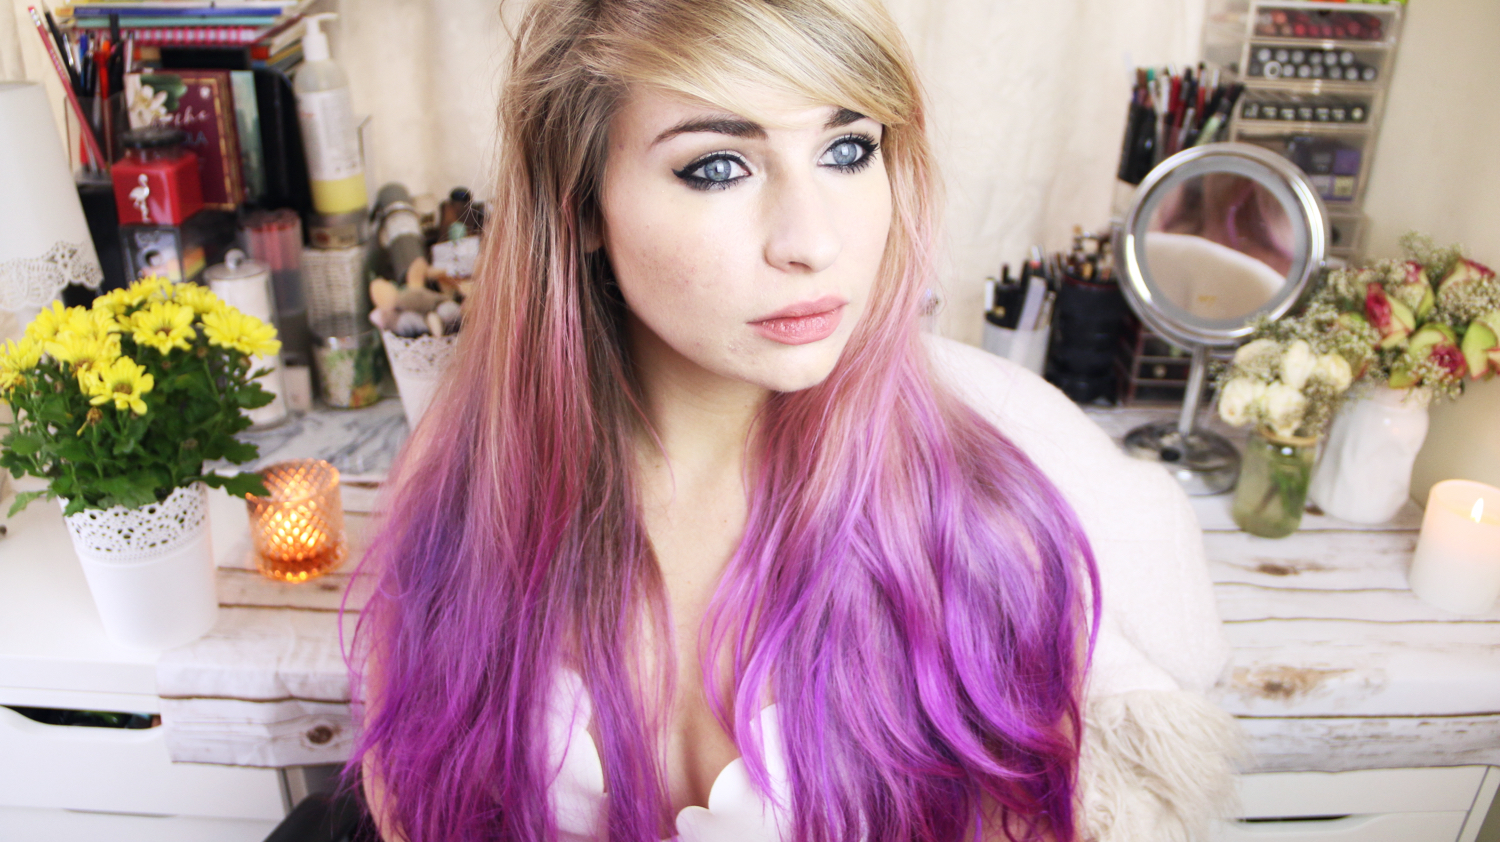 9. "DIY Dip Dye Hair: How to Get the Perfect Green and Blue Gradient" - wide 4